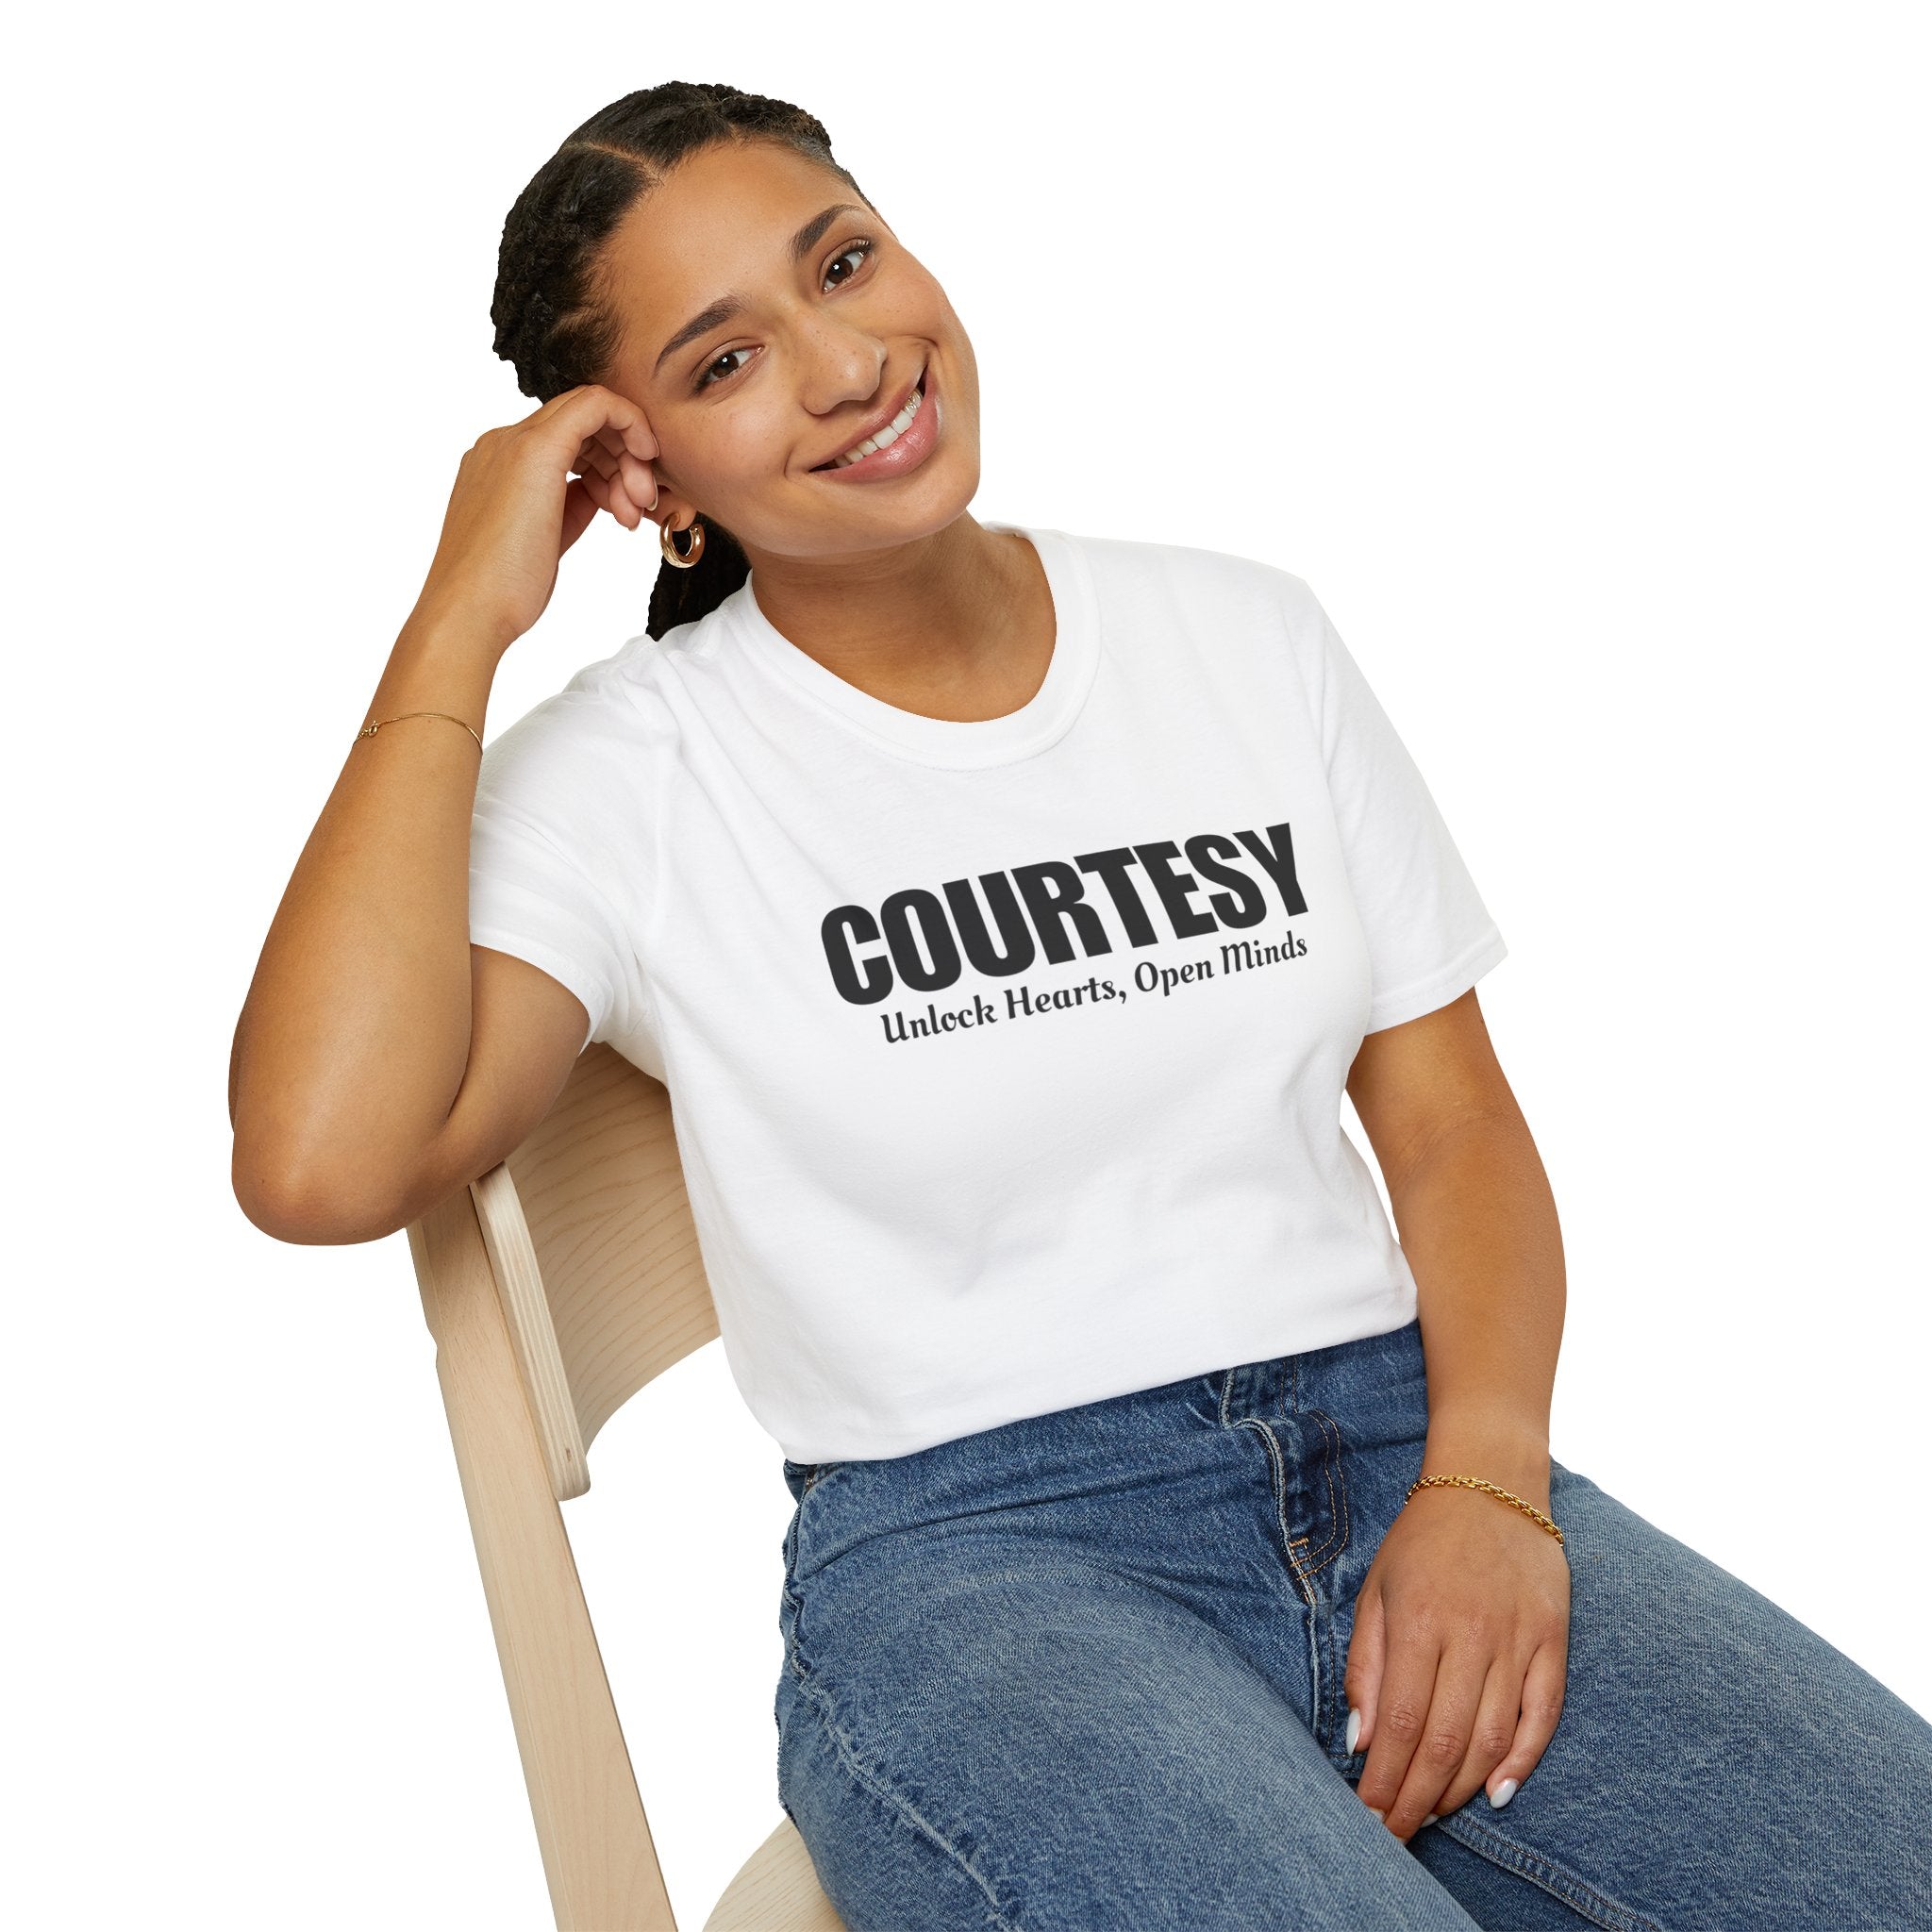 Courtesy T-shirt, Spread Courtesy, Awareness T-Shirt, Unlock Hearts, Stop Bullying, Anti-Bullying Shirt, Richness of Respect, Kindness, Open Minds